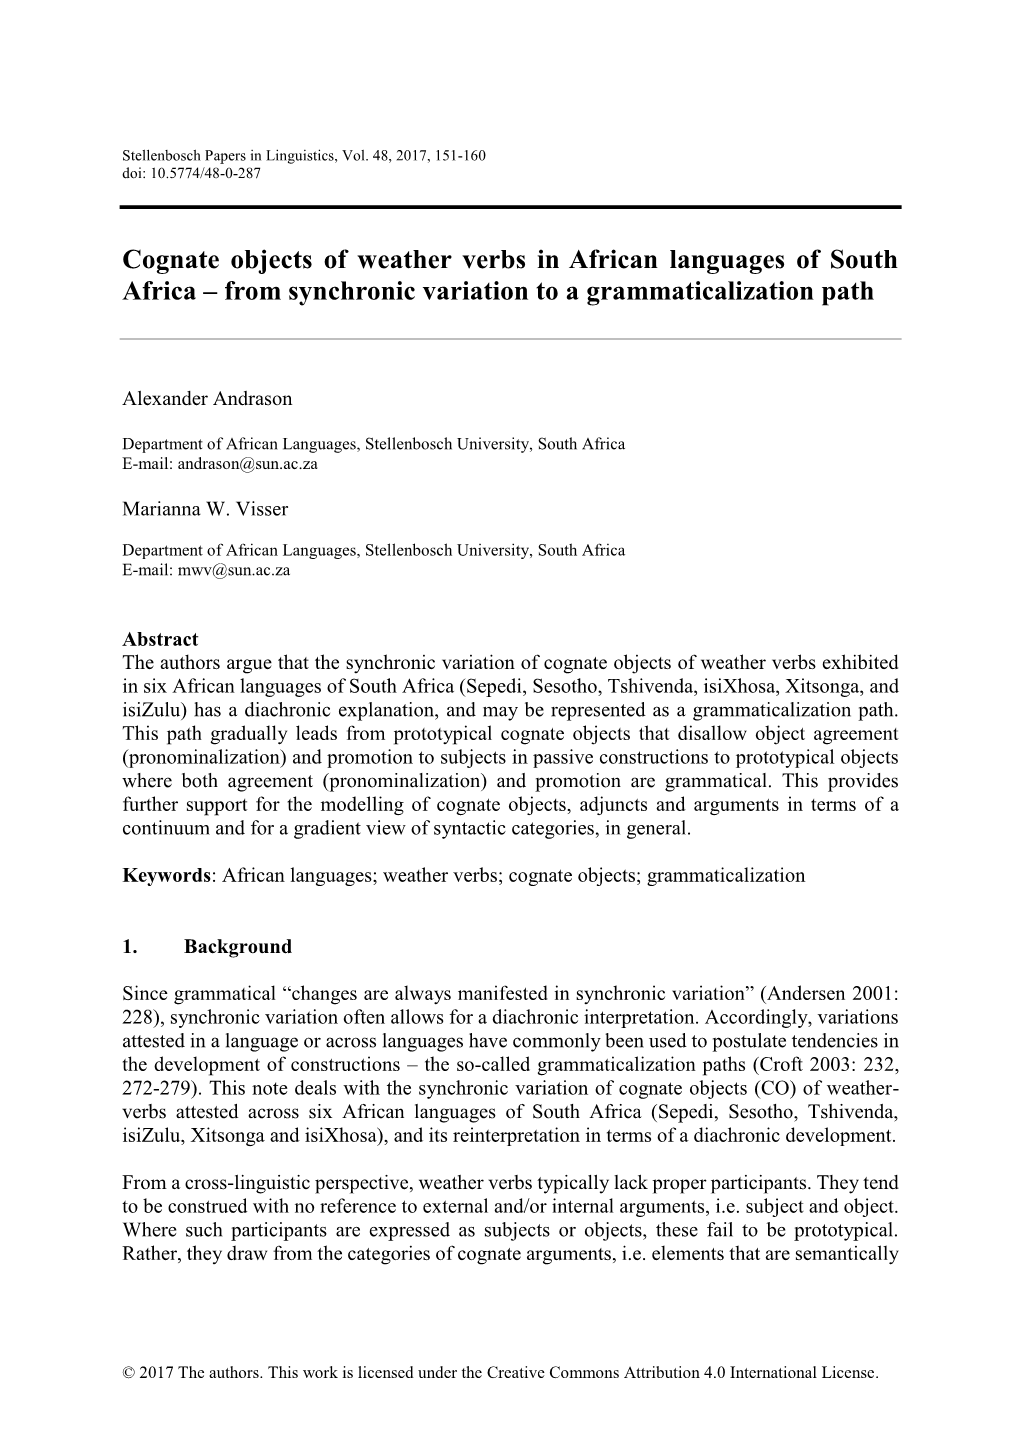 Cognate Objects of Weather Verbs in African Languages of South Africa – from Synchronic Variation to a Grammaticalization Path